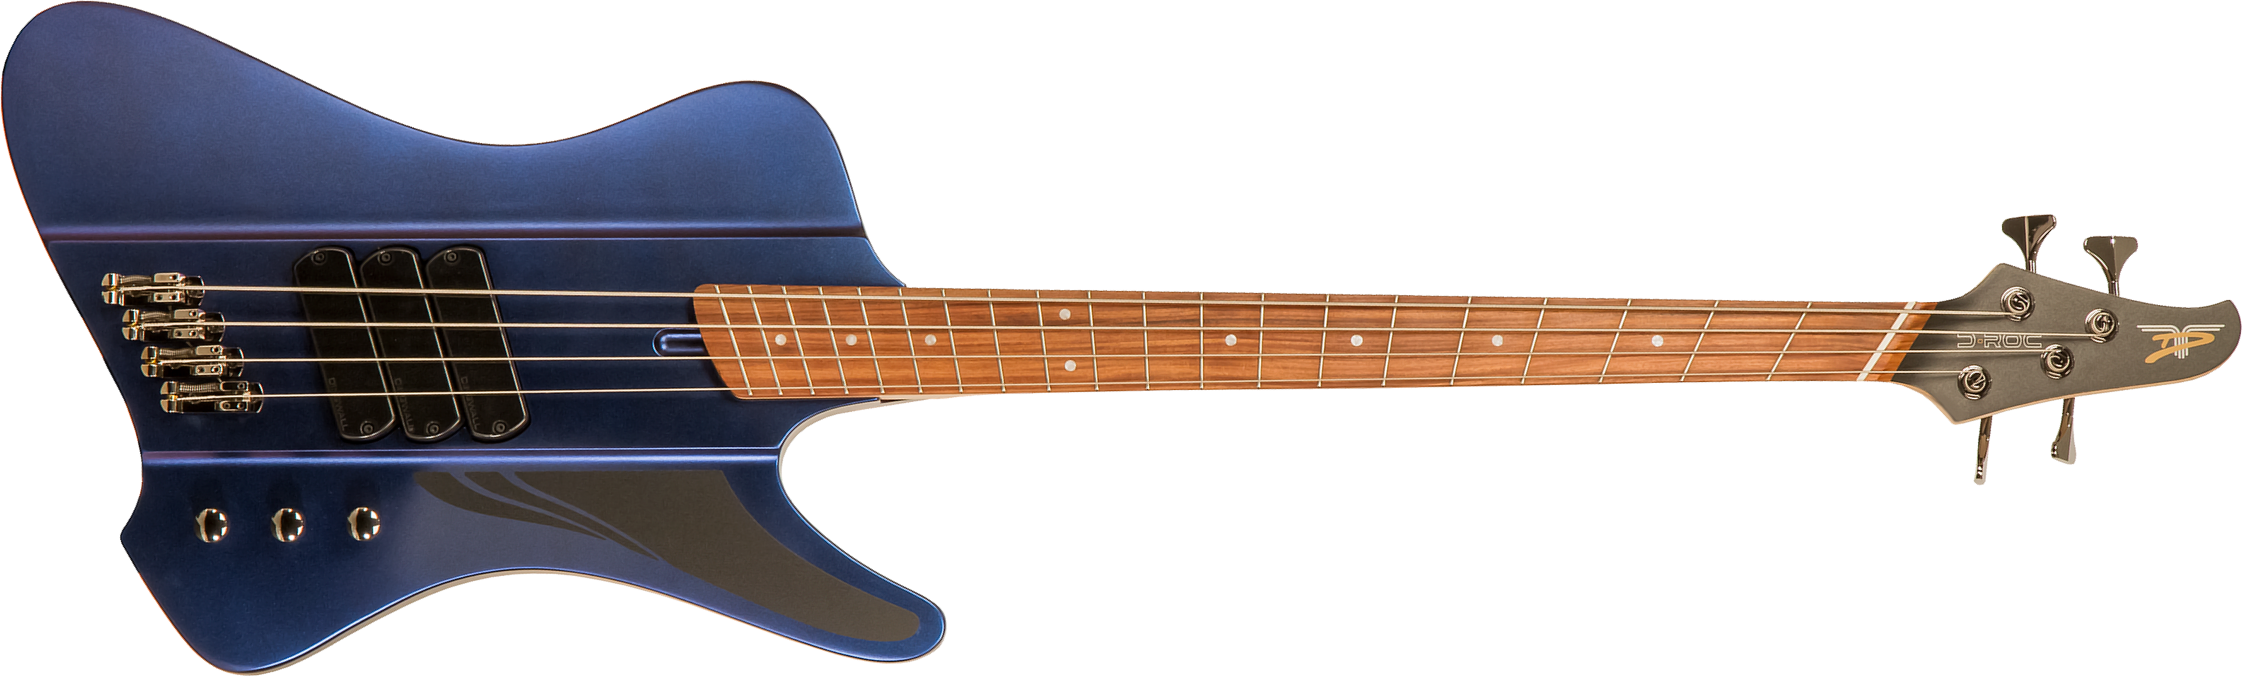 Dingwall D-roc Standard 4c 3-pickups Pf - Blue To Purple Colorshift - Solid body electric bass - Main picture